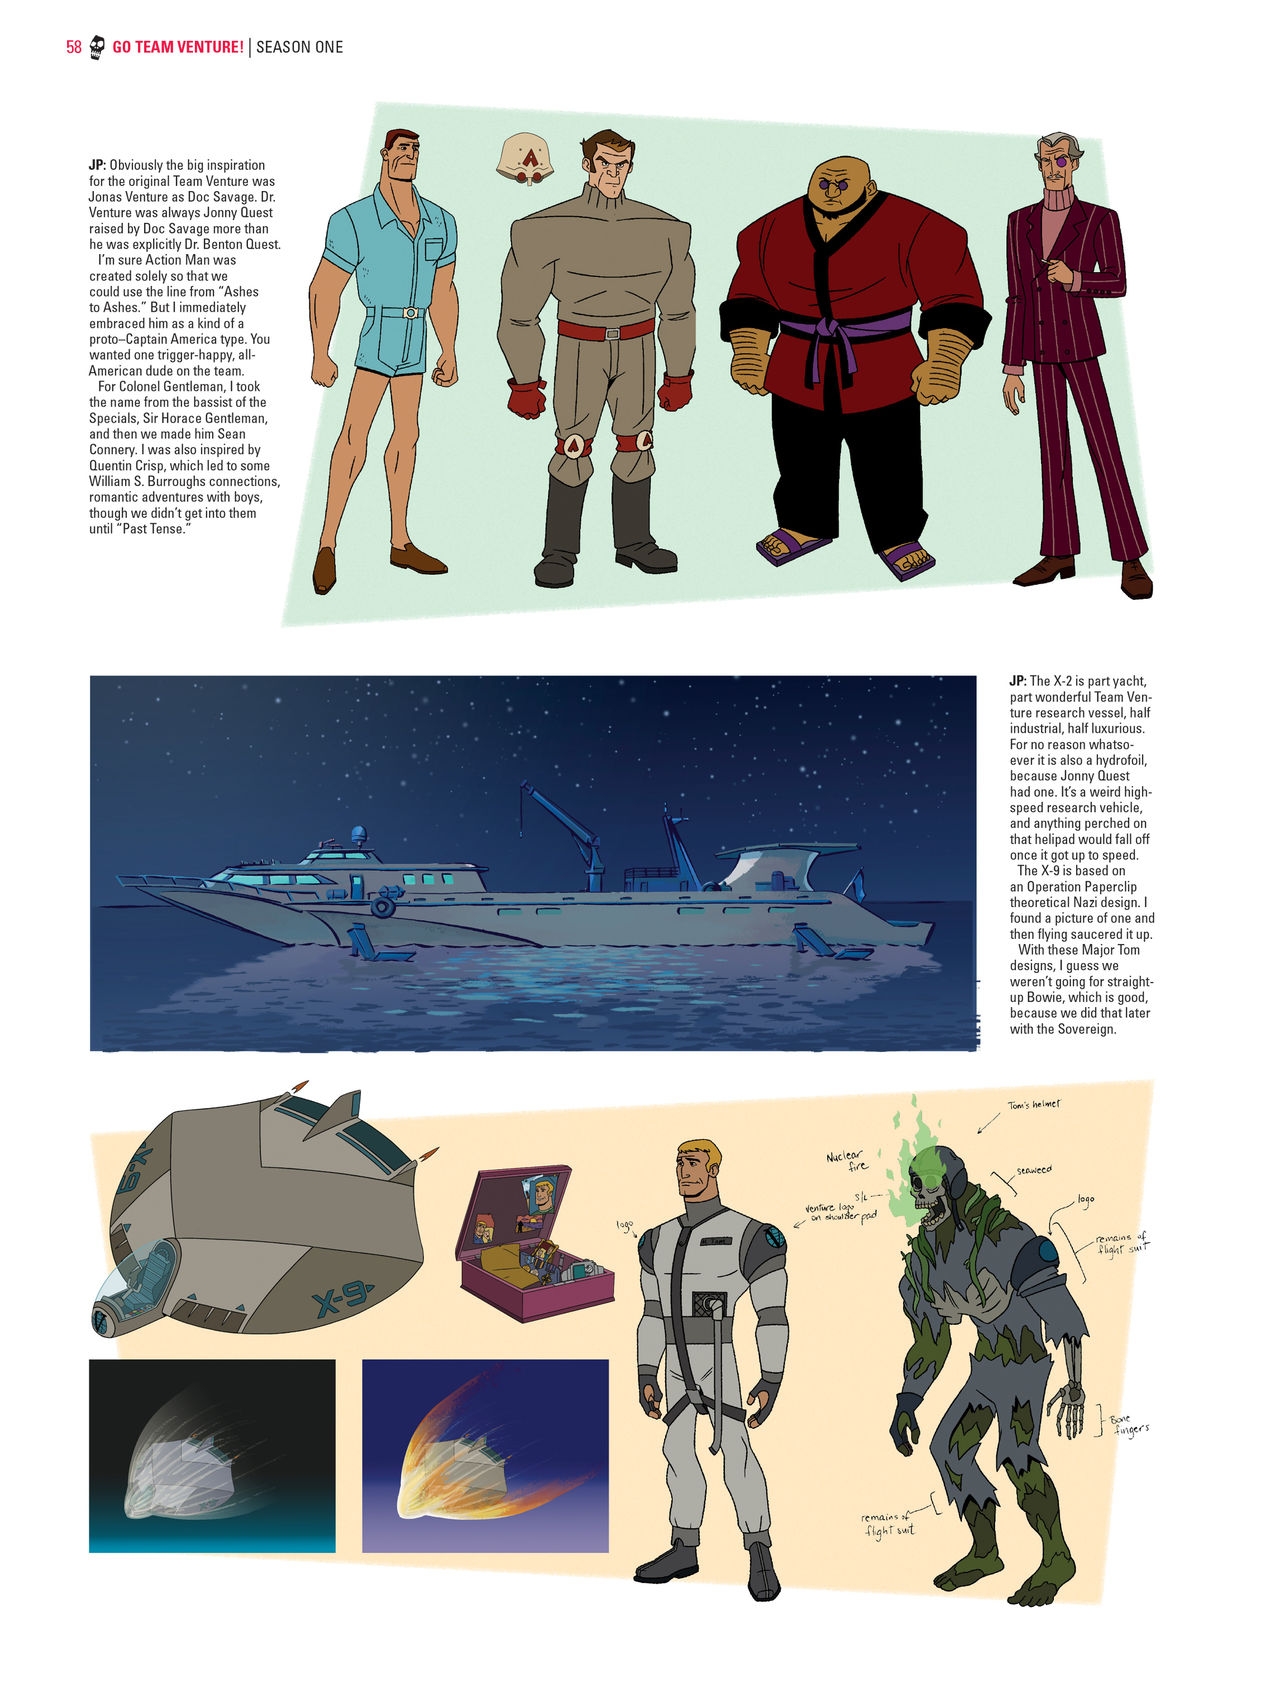 Go Team Venture! - The Art and Making of the Venture Bros 57